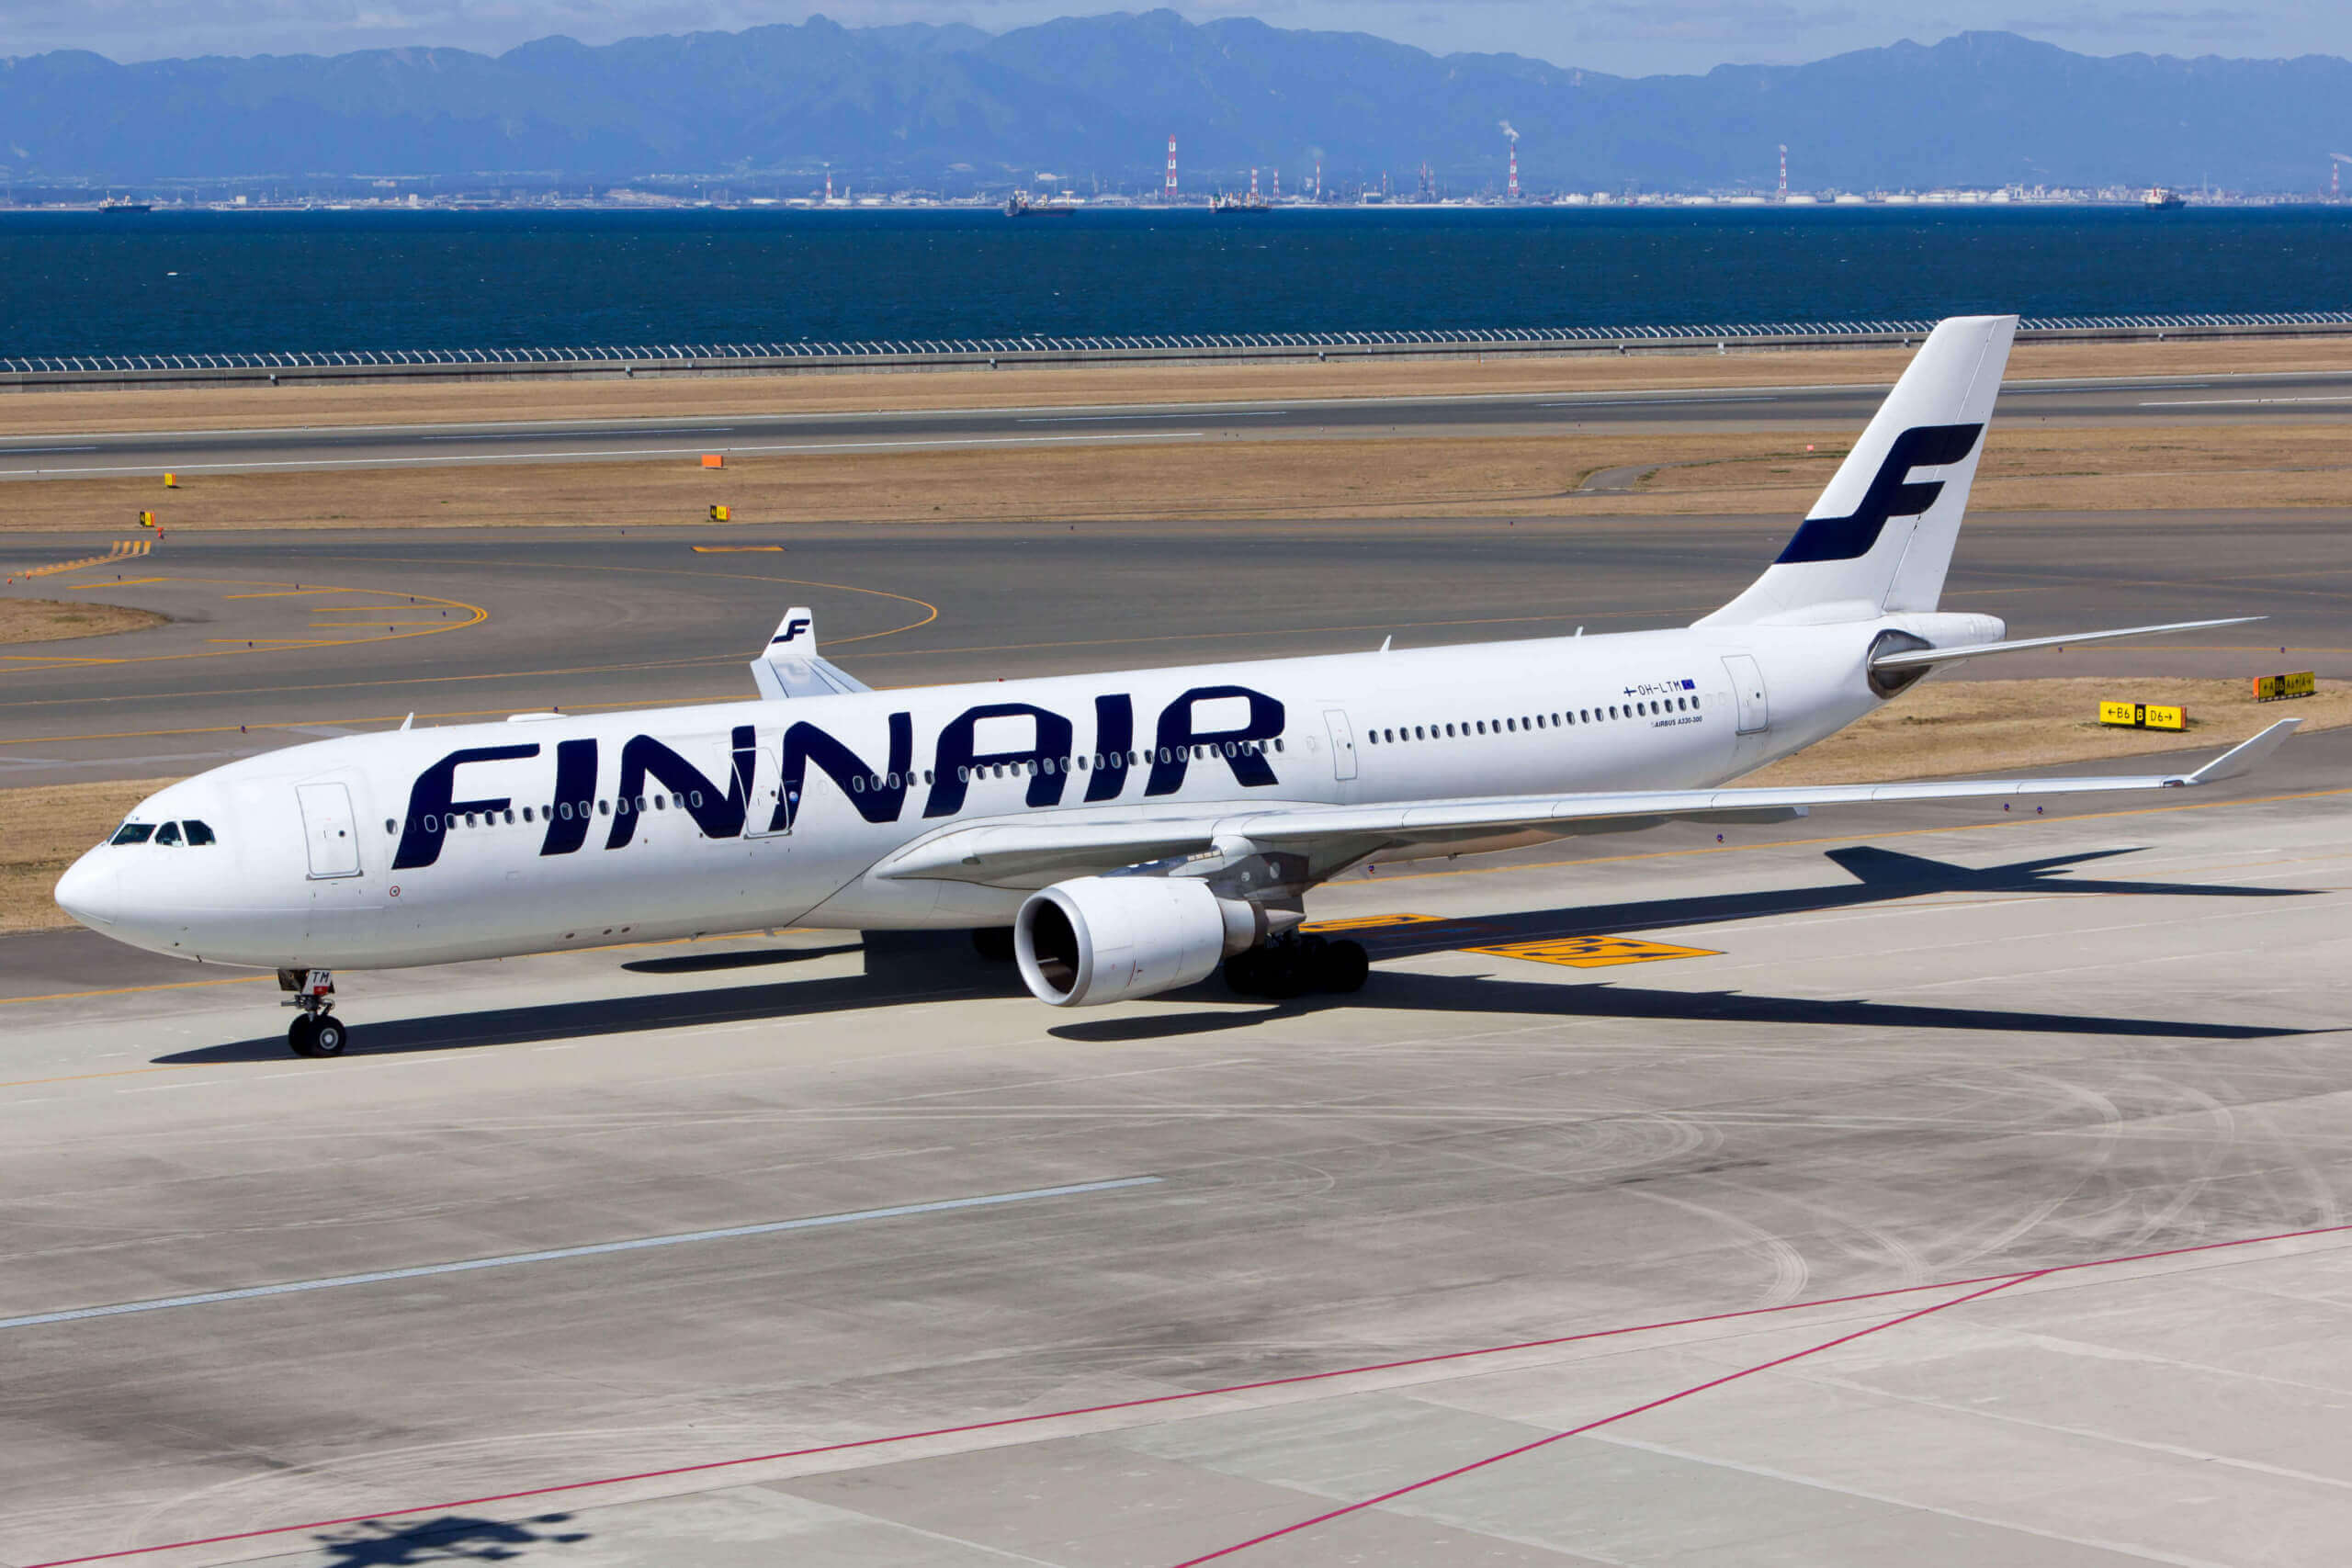 TPConnects to enable Finnair to direct distribute its NDC content